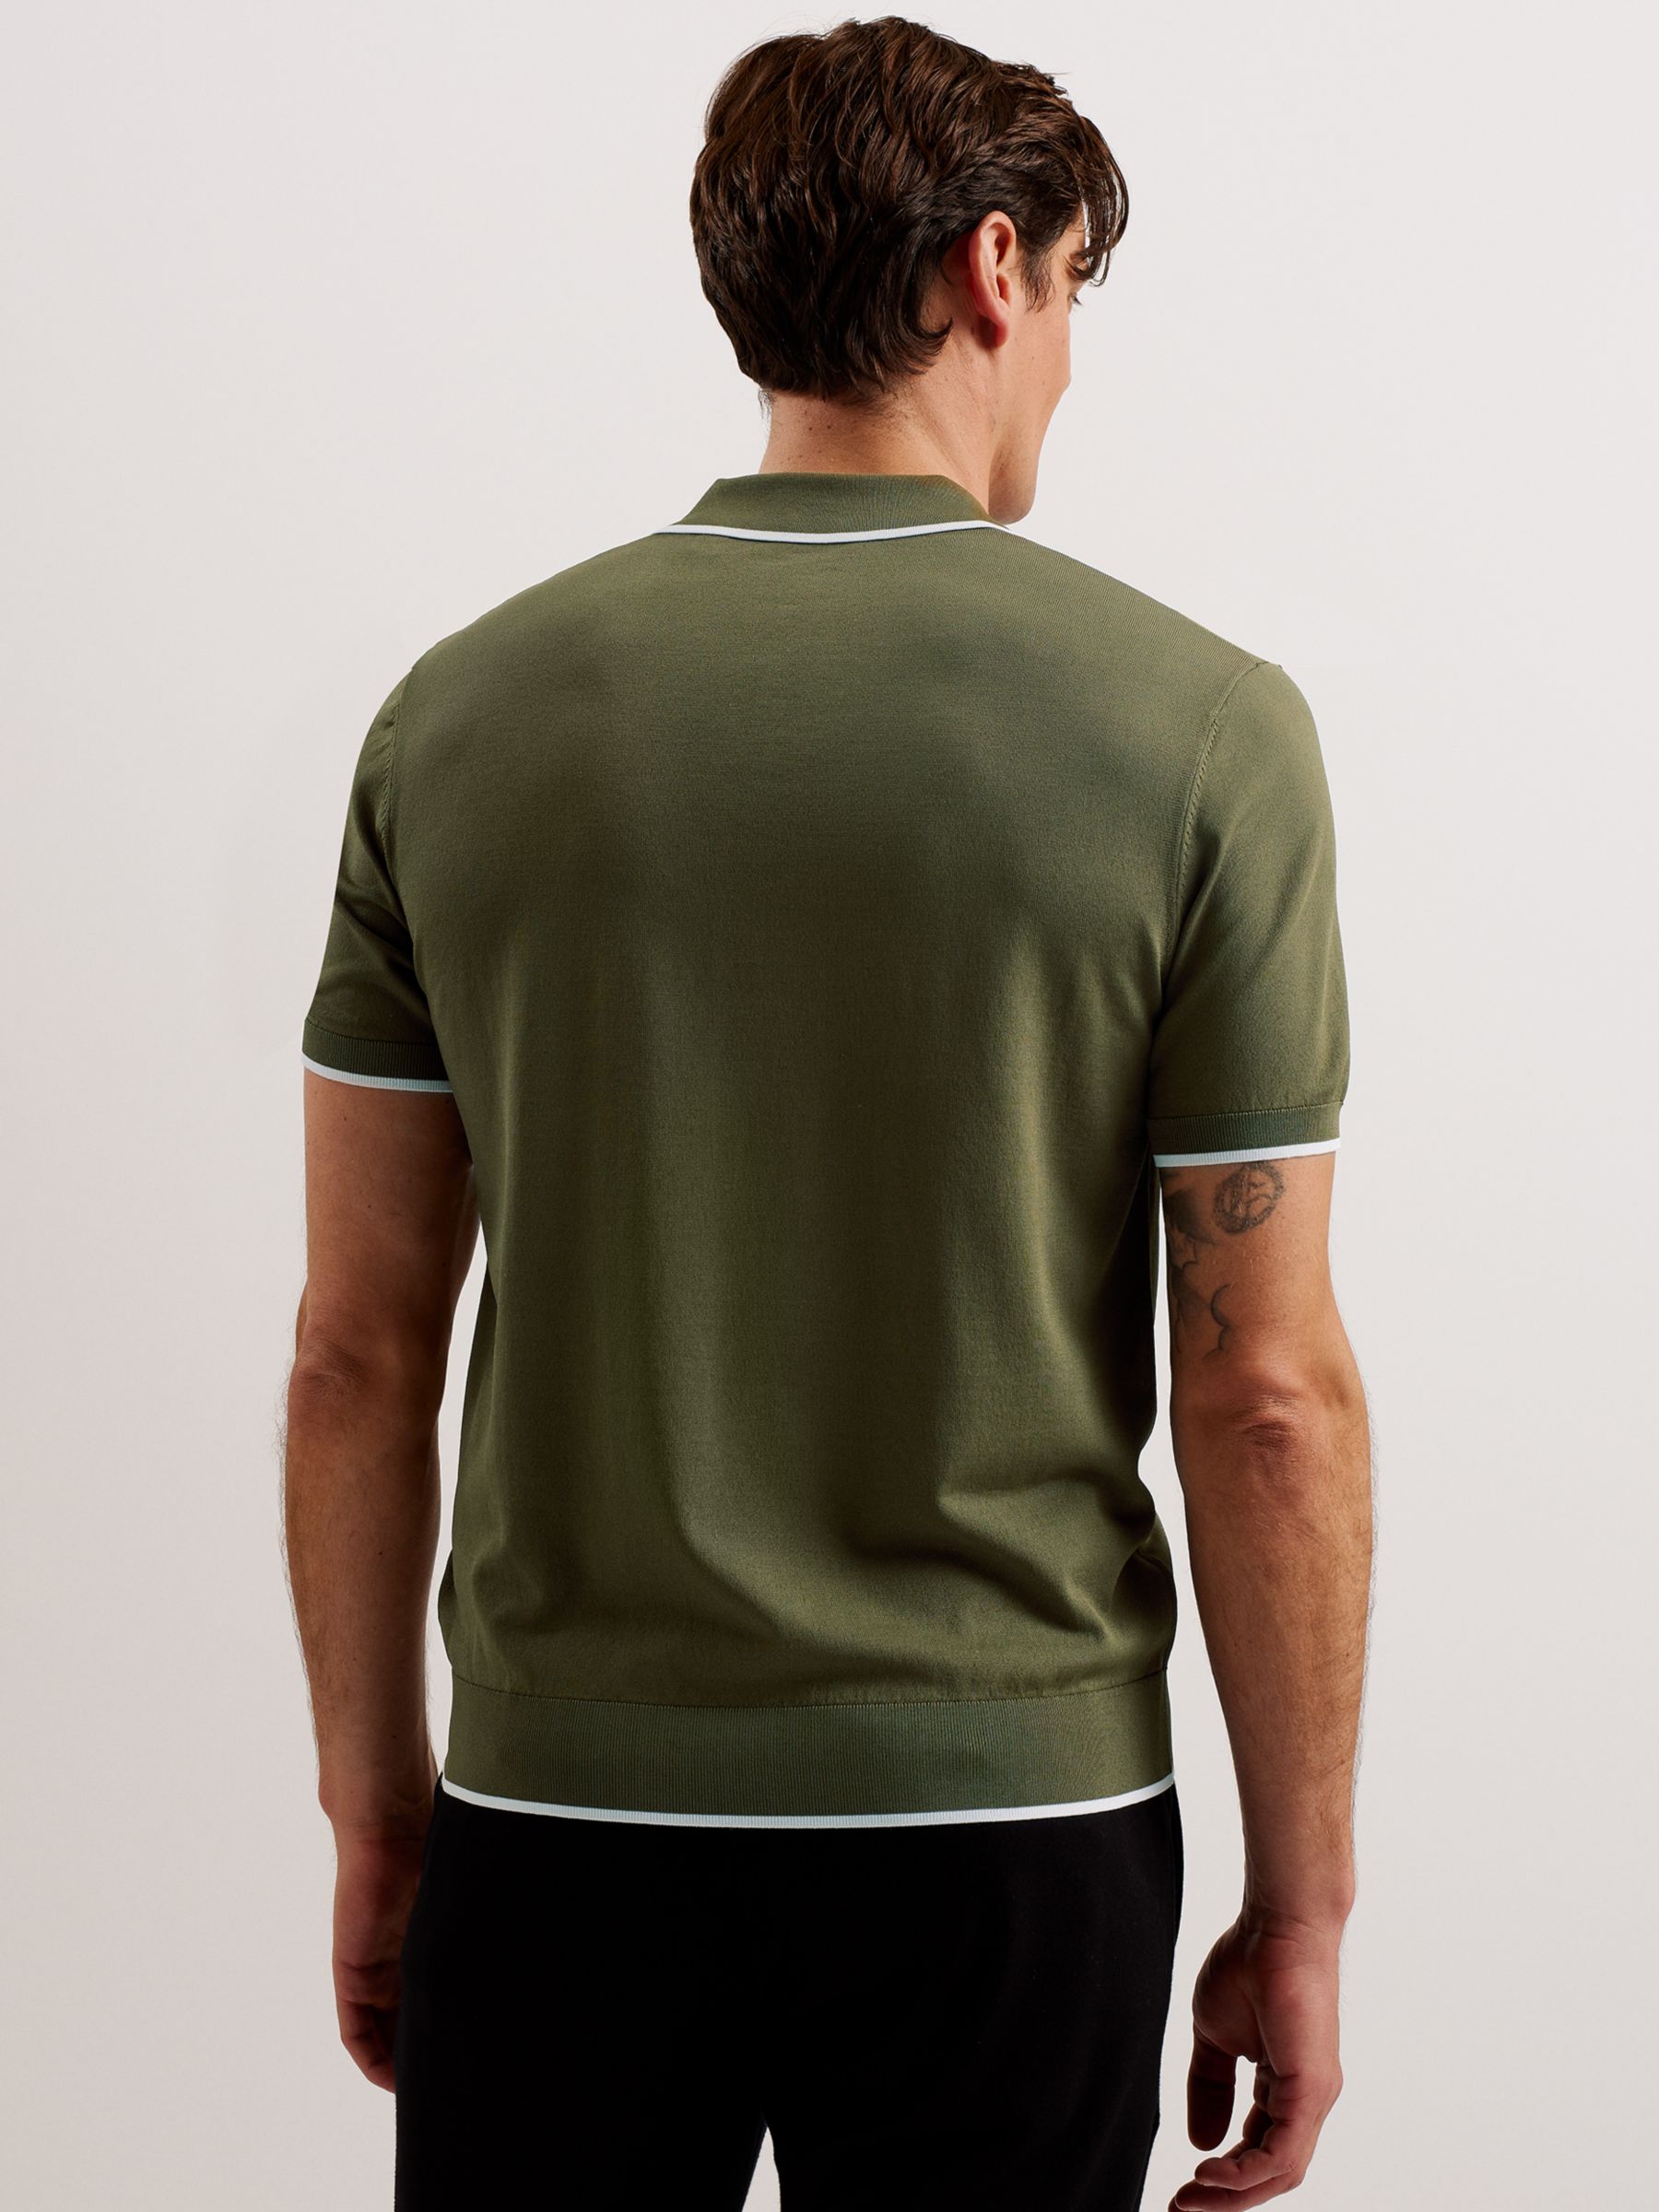 Ted Baker Open Neck Polo Top, Green Olive, XS